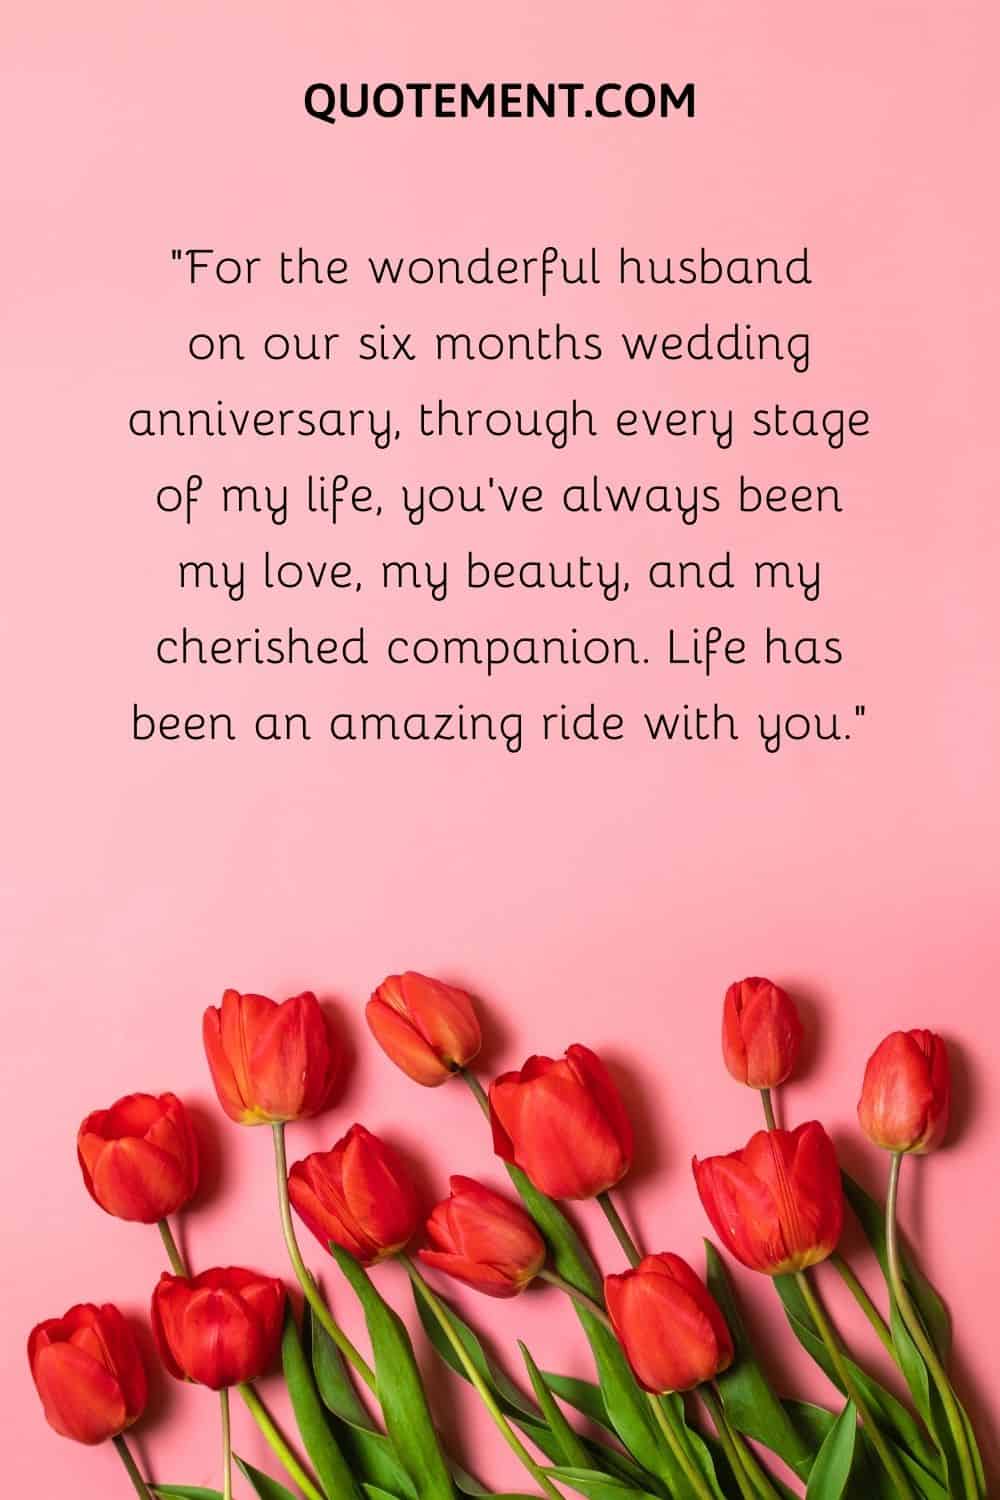 For the wonderful husband on our six months wedding anniversary